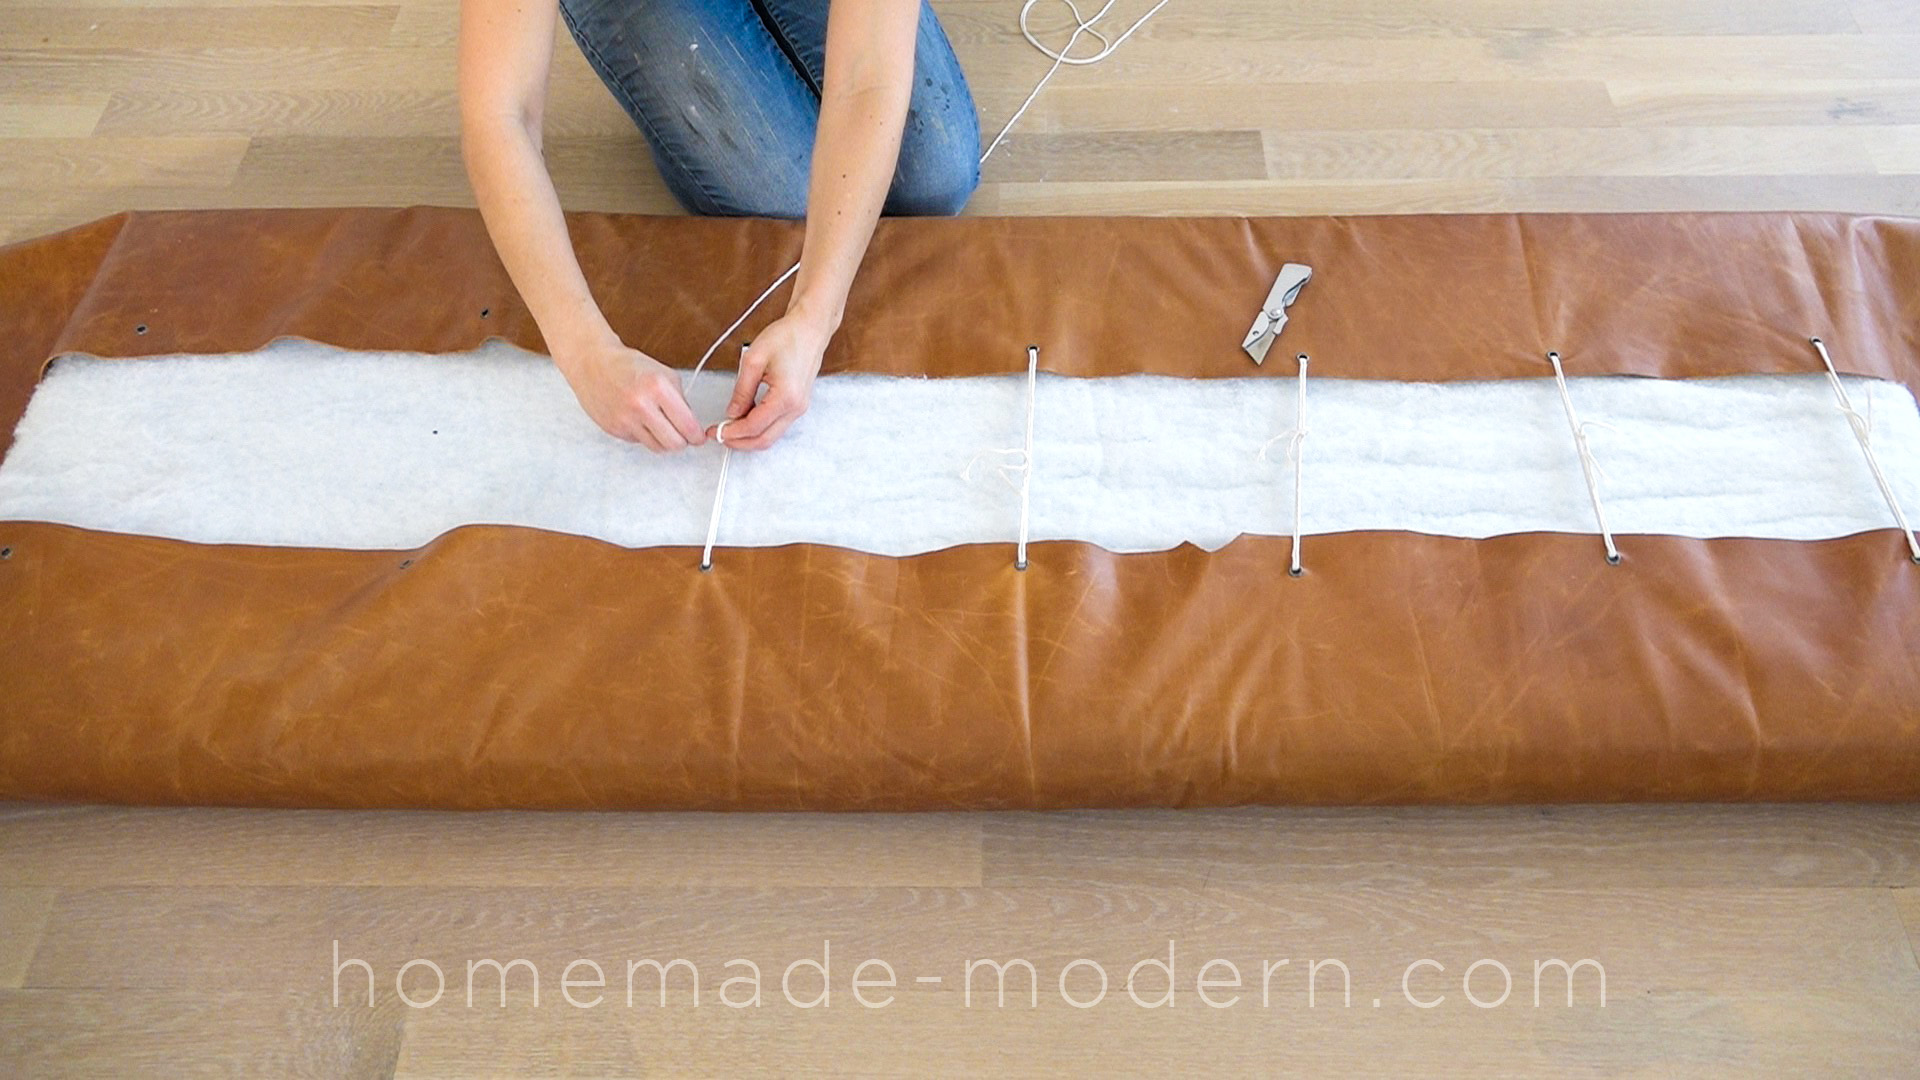 This DIY Zig Zag Sofa was designed specifically for lofts and has a built-in counter along the back. For more information go to HomeMade-Modern.com